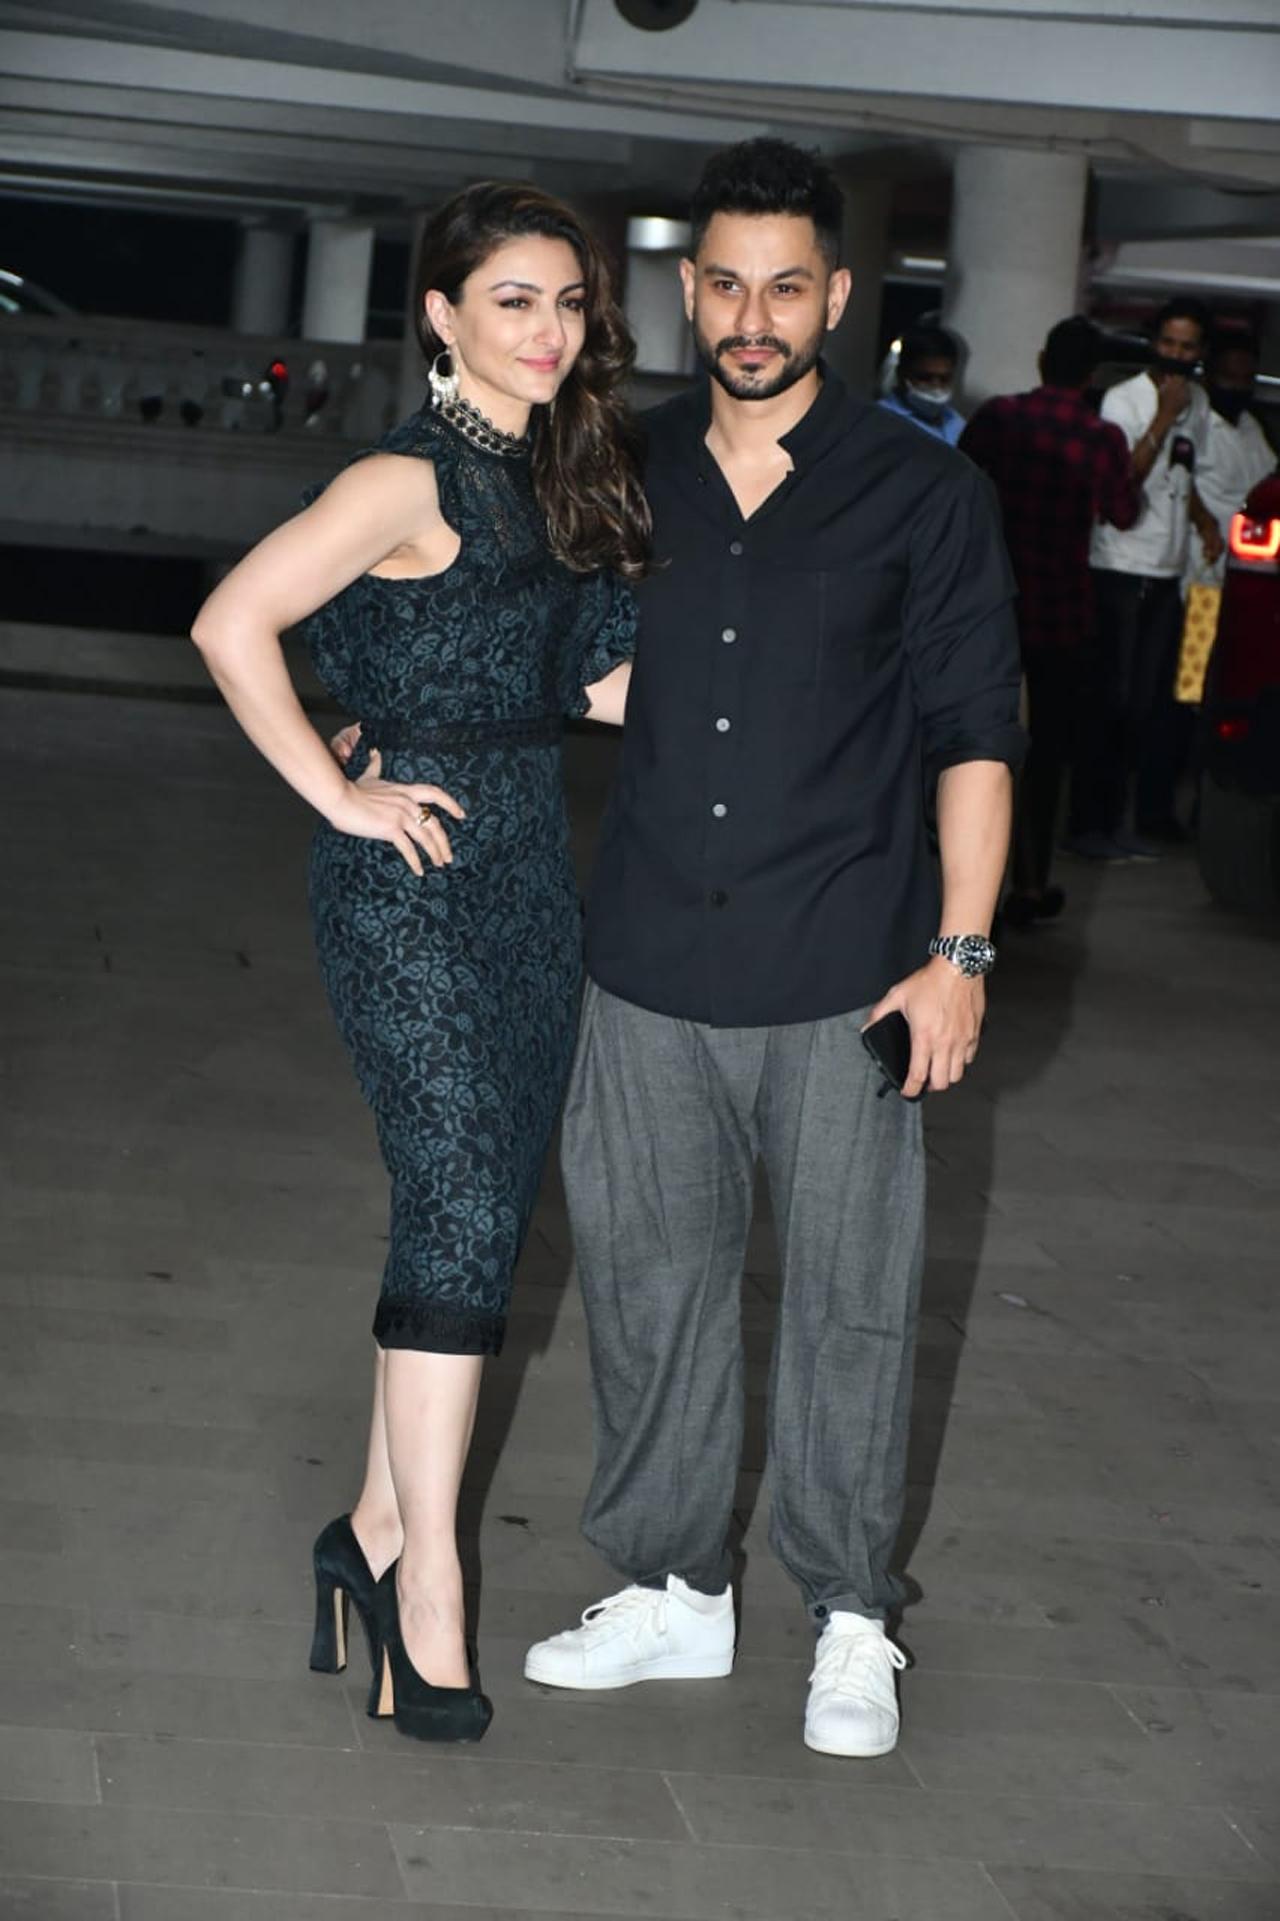 Soha Ali Khan opted for a black lacey dress, whereas Kunal Kemmu sported a casual attire as they arrived at Shibani-Farhan's post-wedding party.